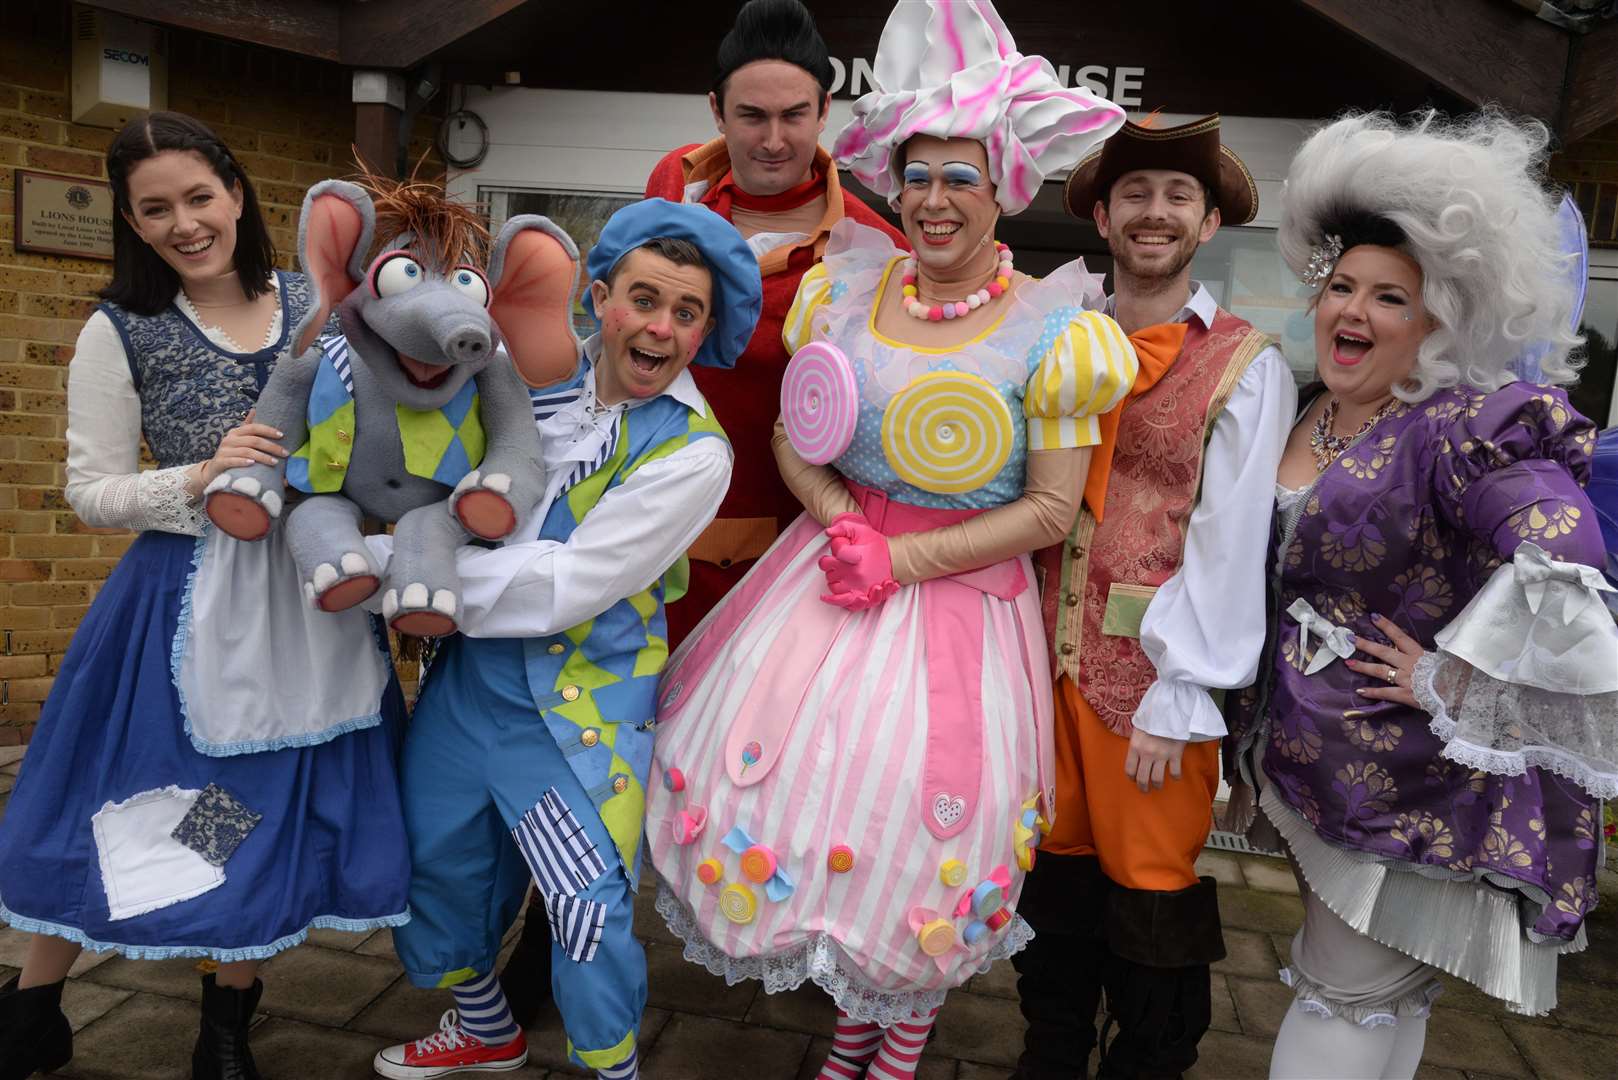 Cast members from this year's Woodville panto, Beauty and the Beast. Picture: Chris Davey